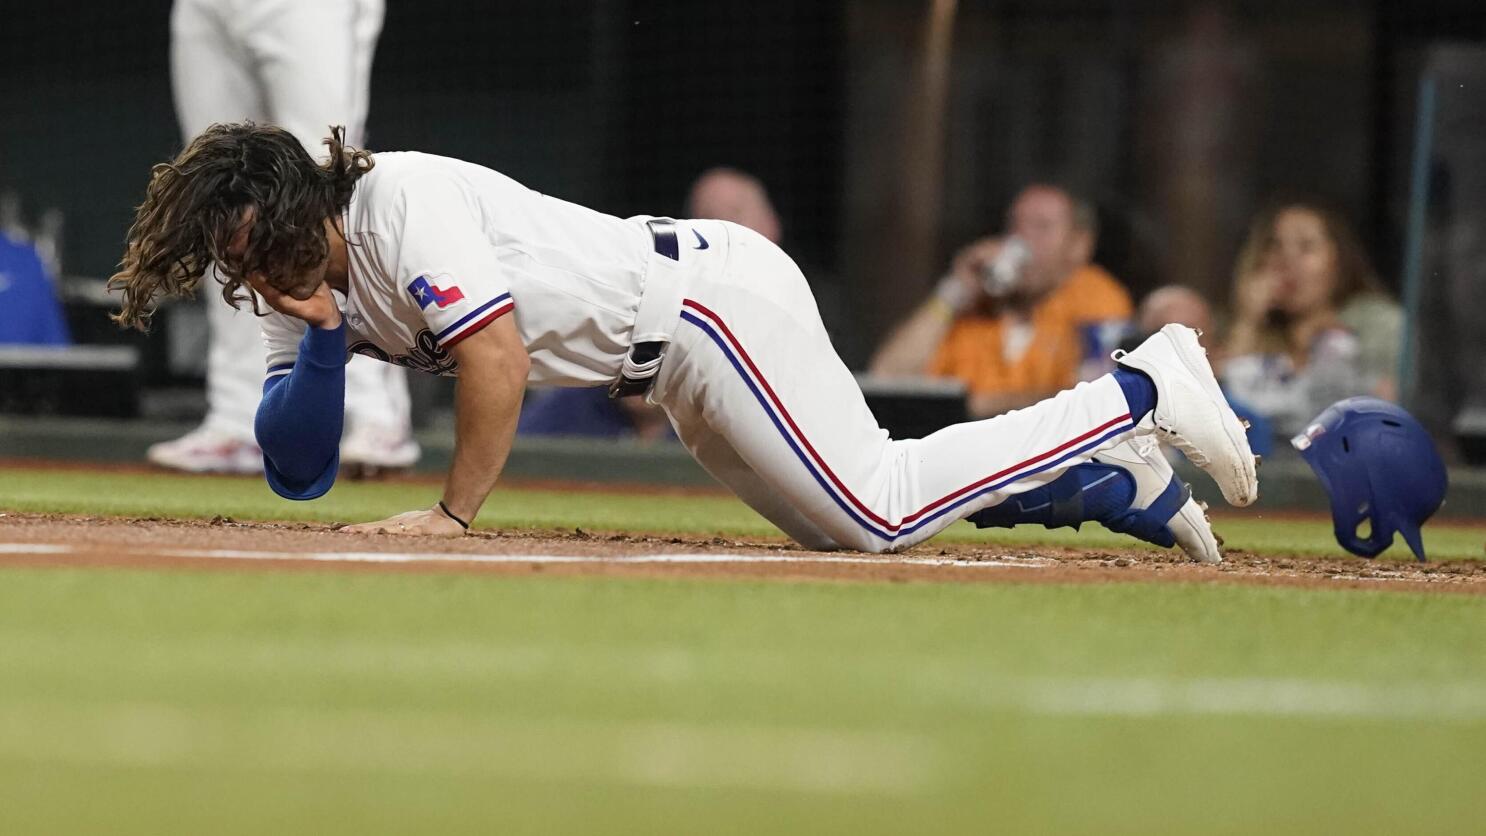 Rangers' Josh Smith hospitalized after getting hit in face with pitch